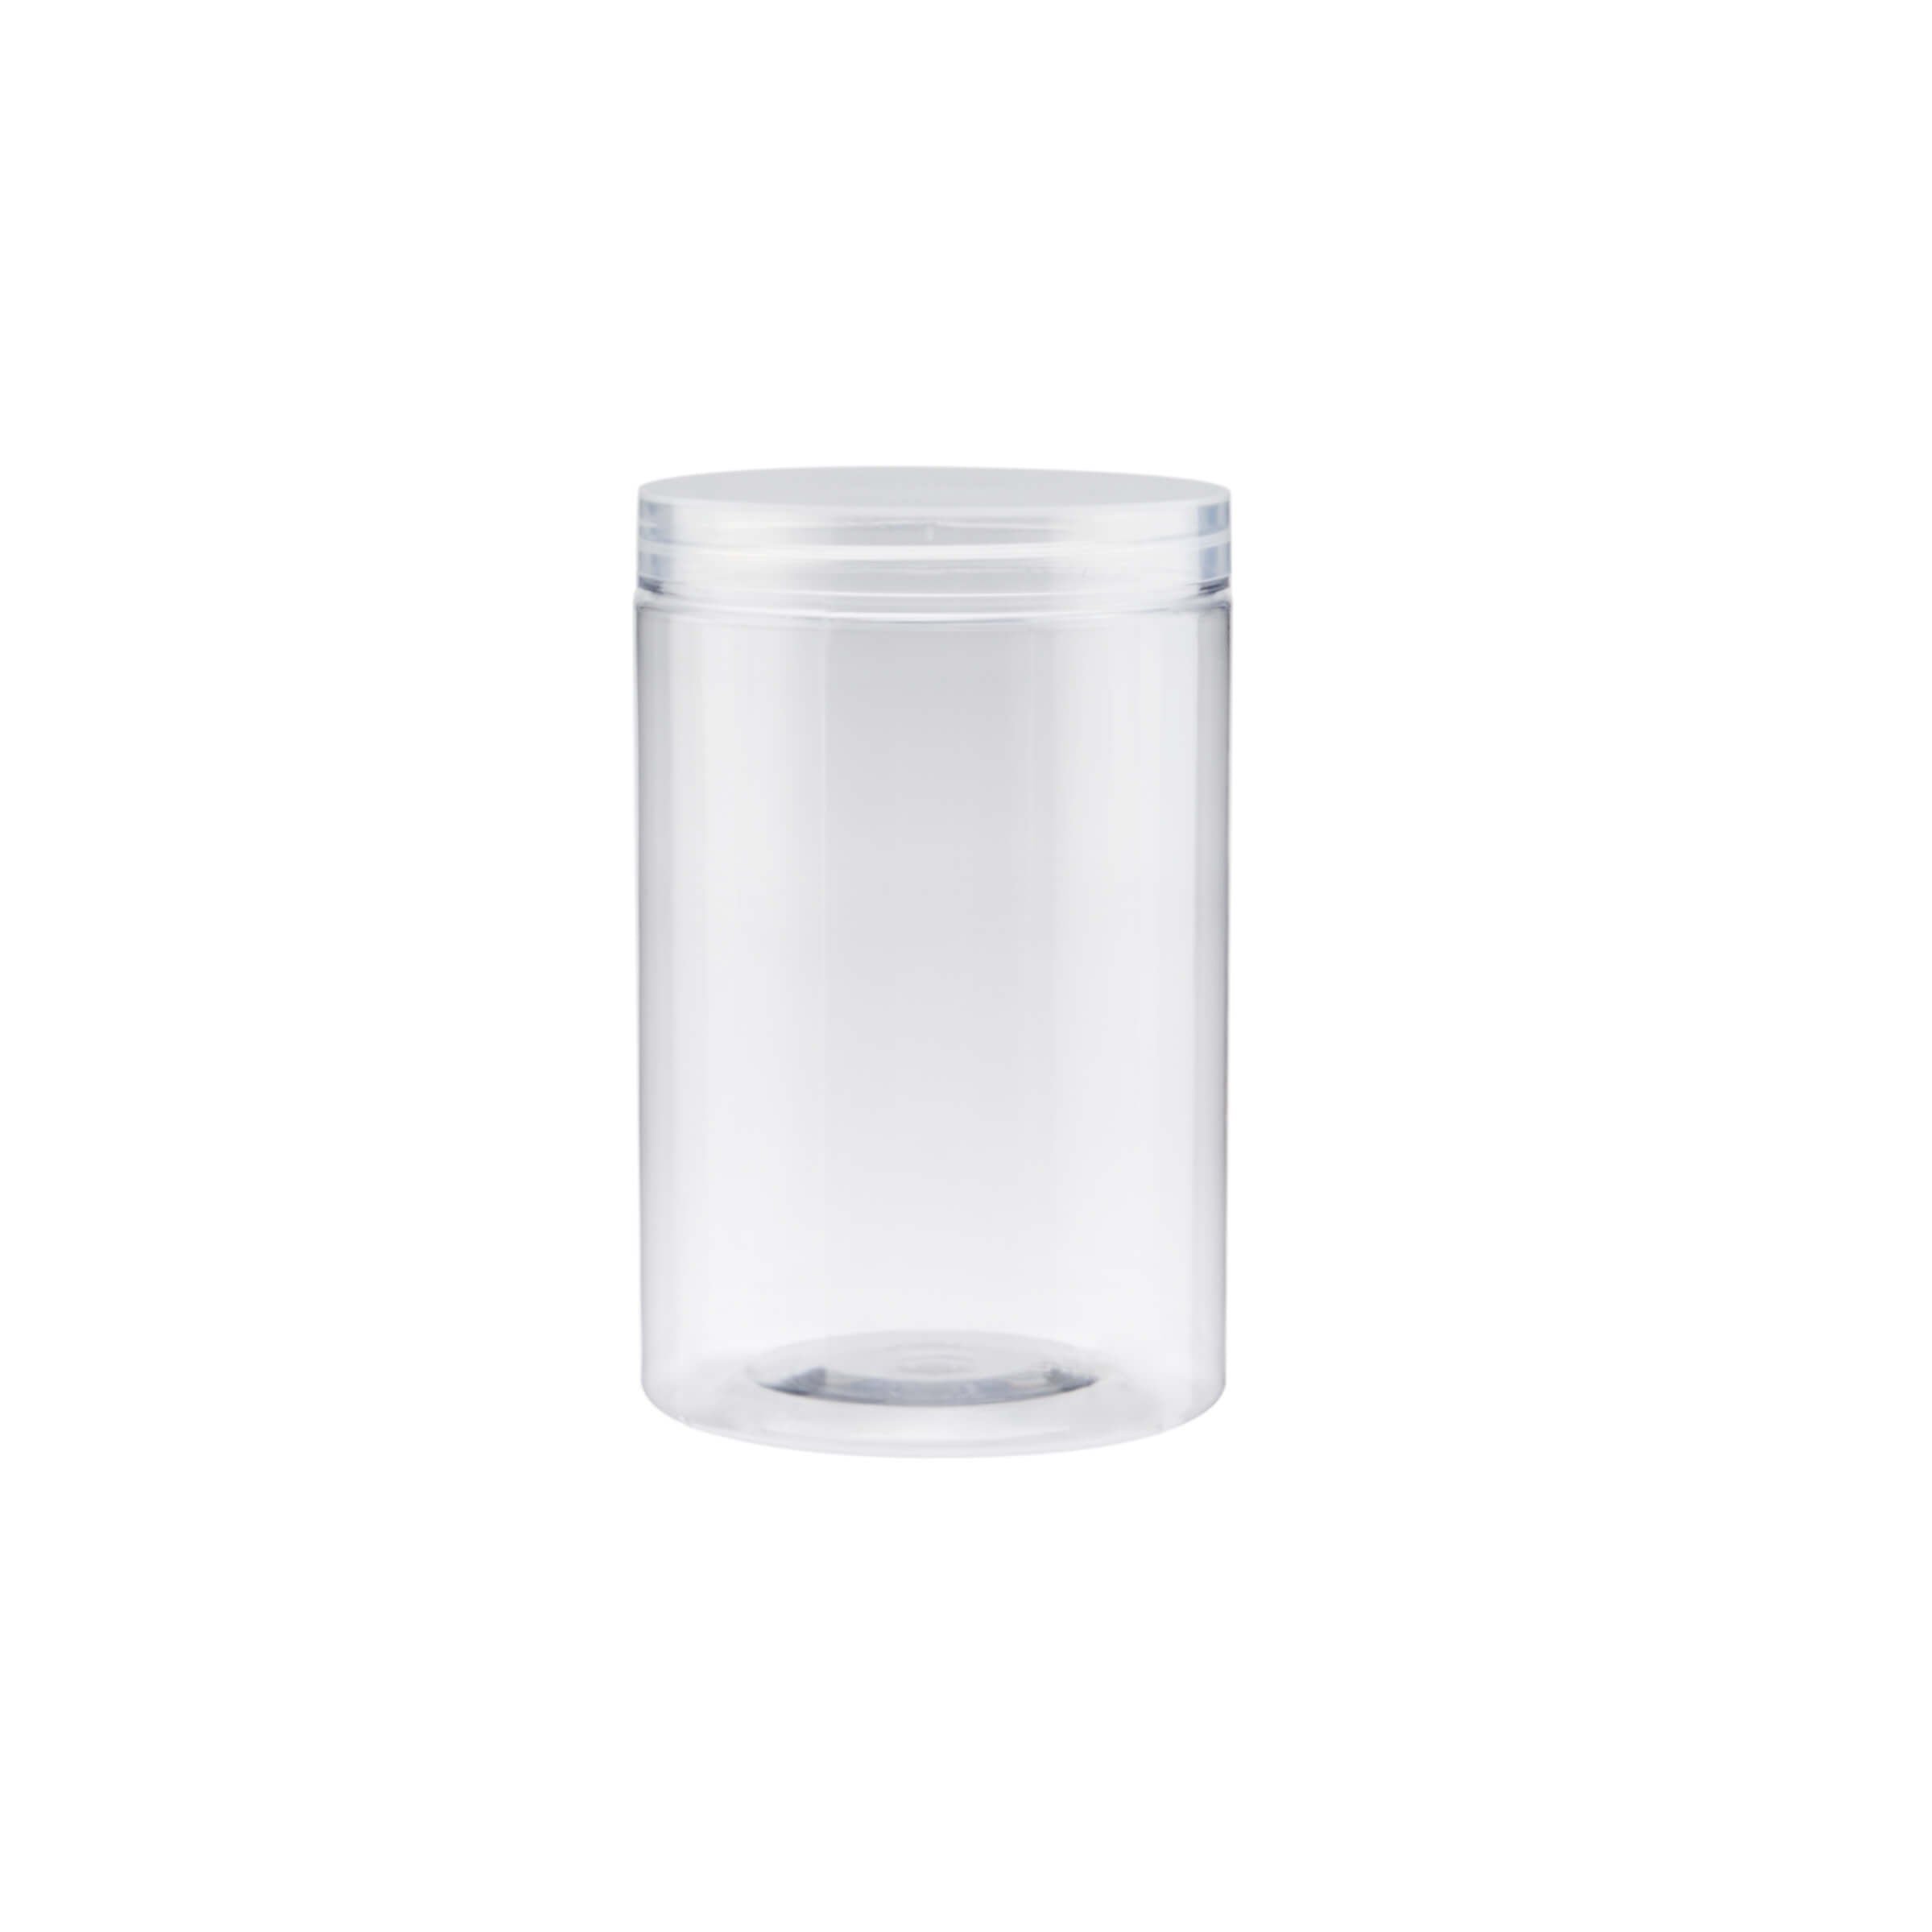 1000ml Clear Plastic Jar with Lid for organization - Hotpack Global